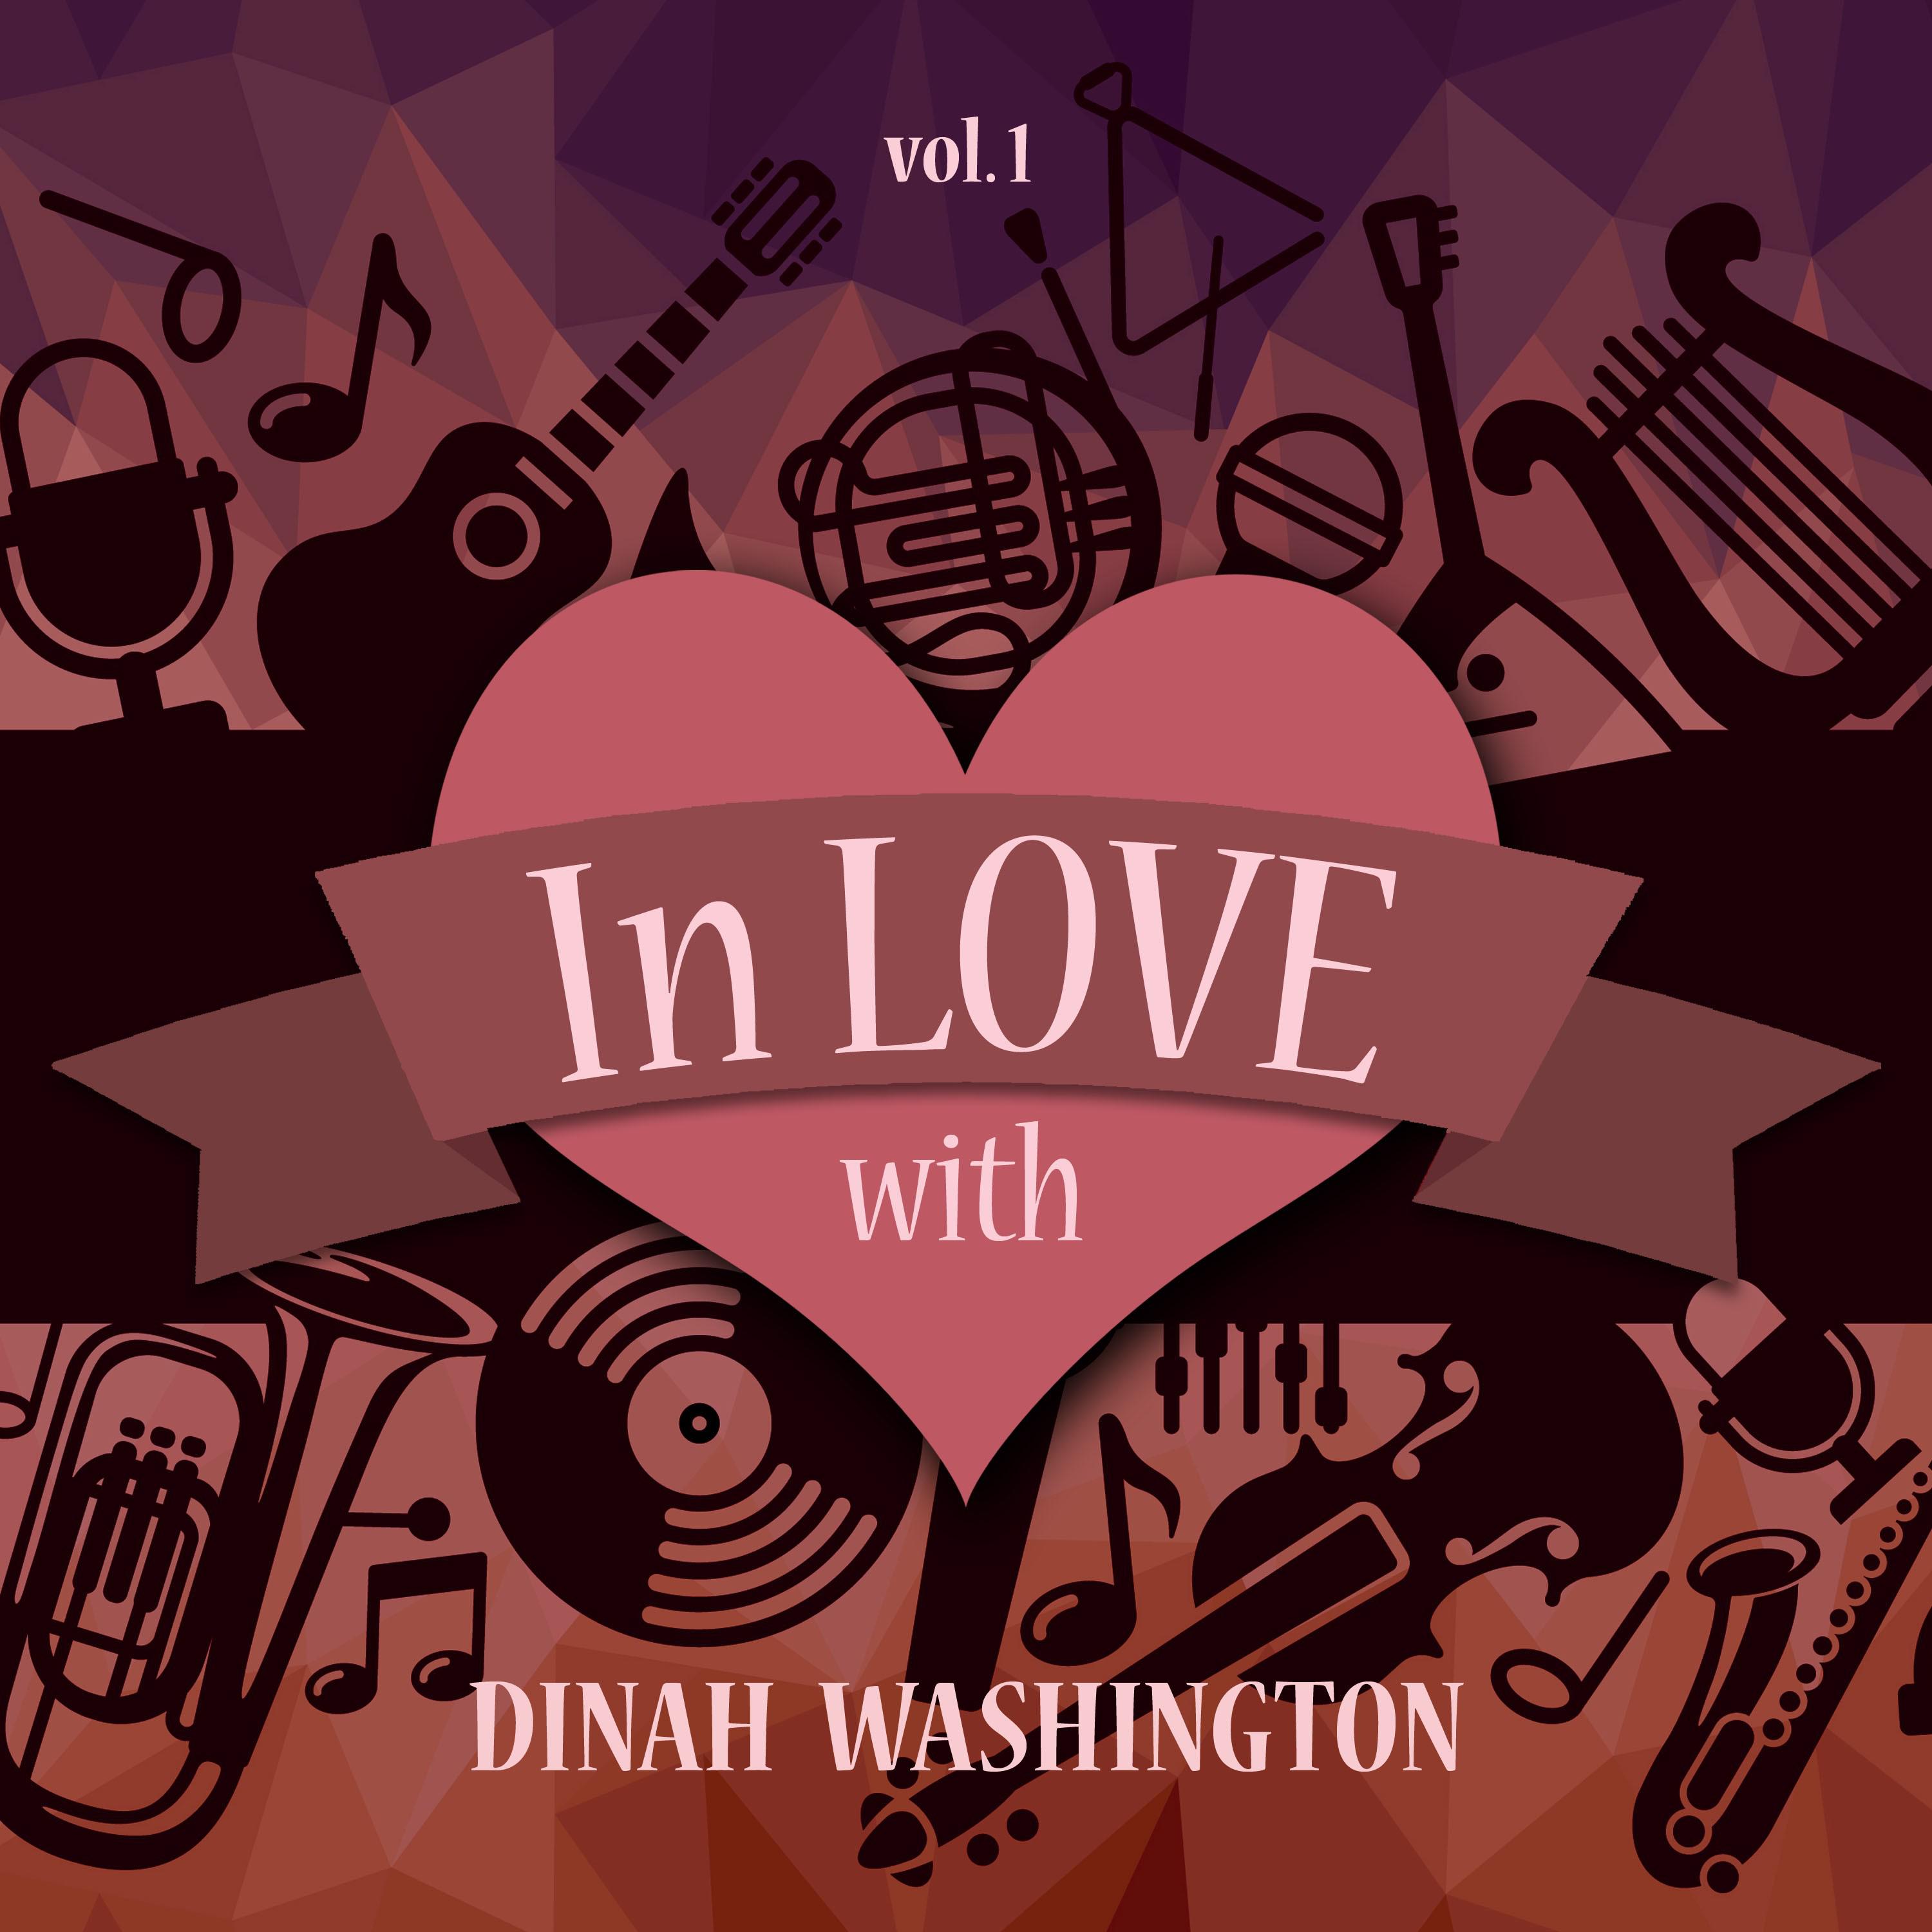 In Love with Dinah Washington, Vol. 1